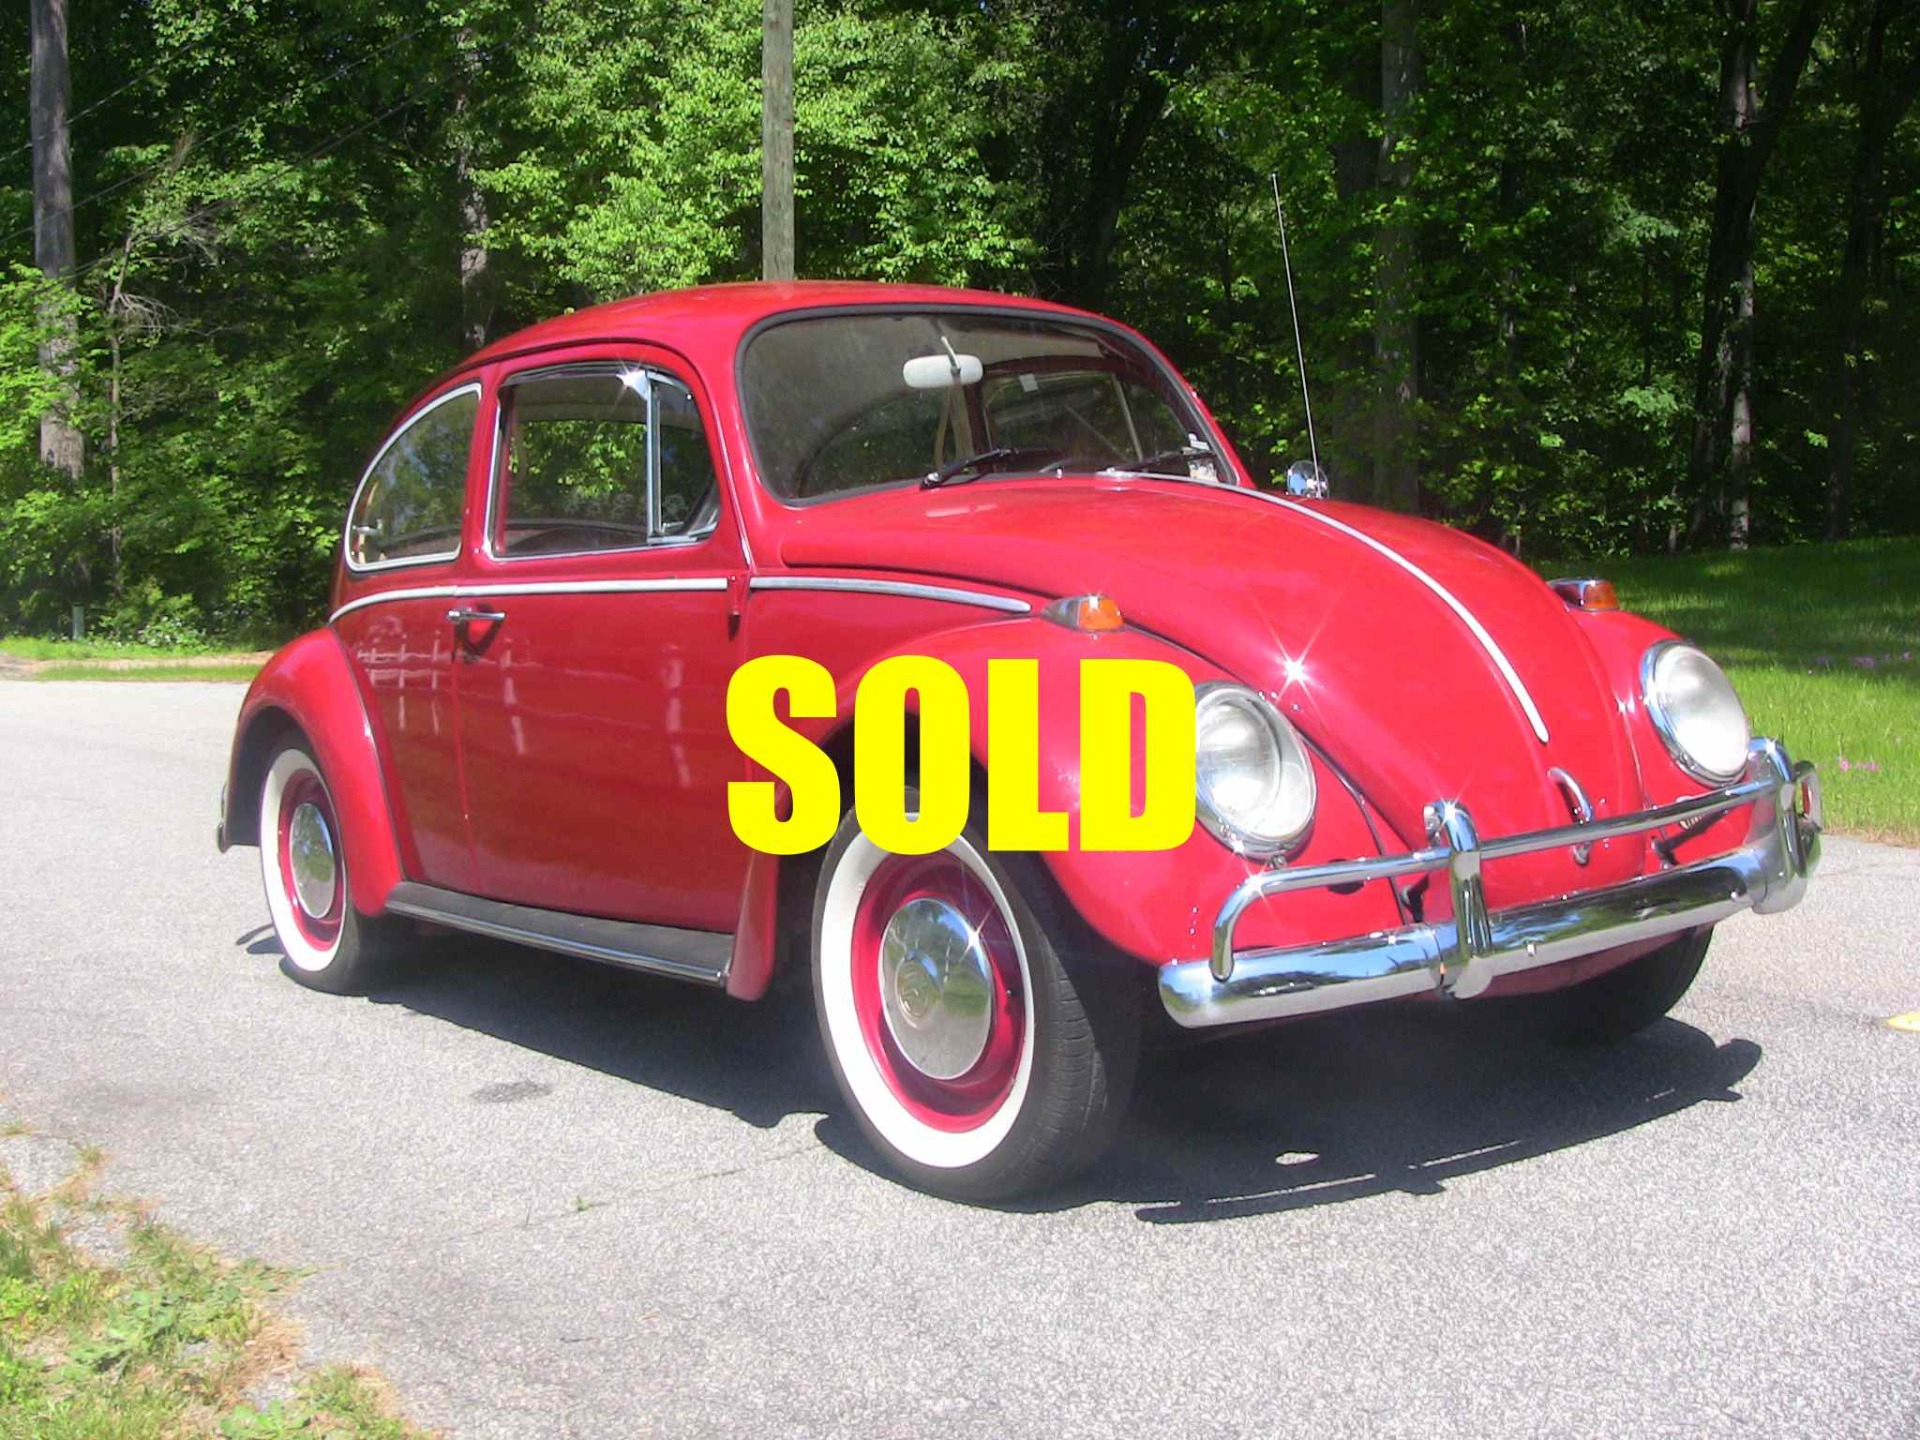 Used 1966 Volkswagen Beetle  29 , For Sale $11500, Call Us: (704) 996-3735